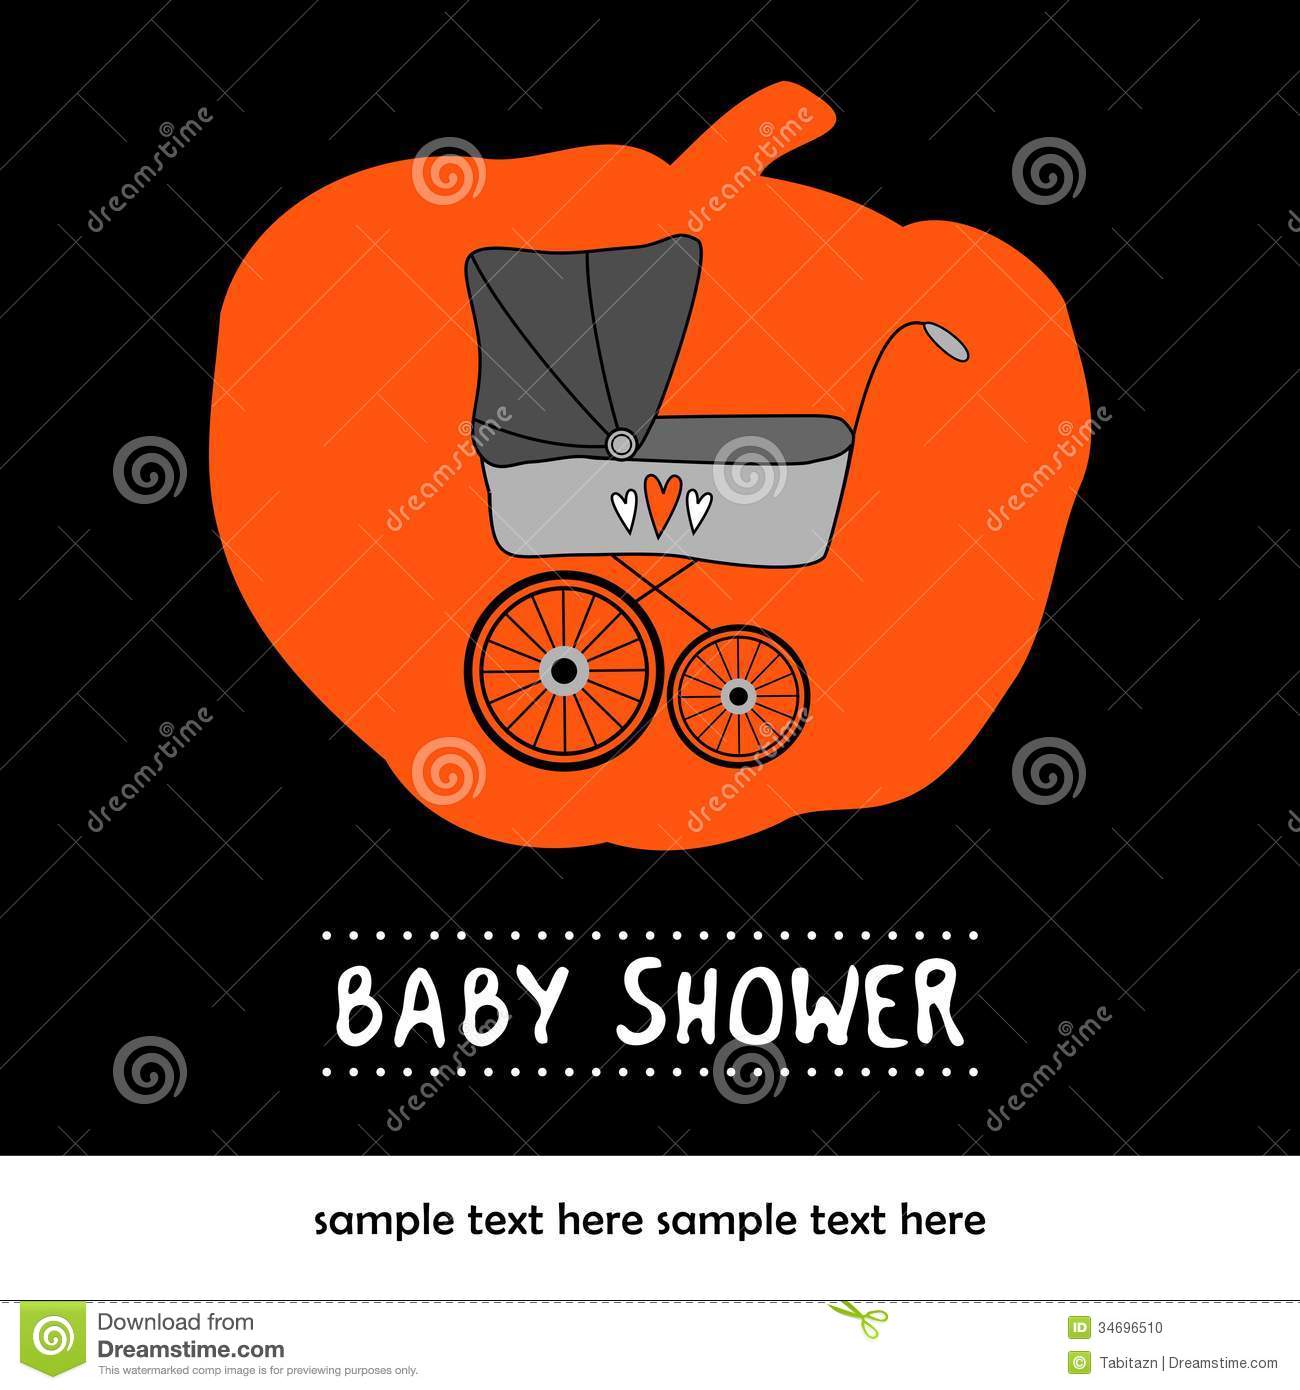 Baby Shower Birthday Invitation Card With Baby Carriage And Pumpkin